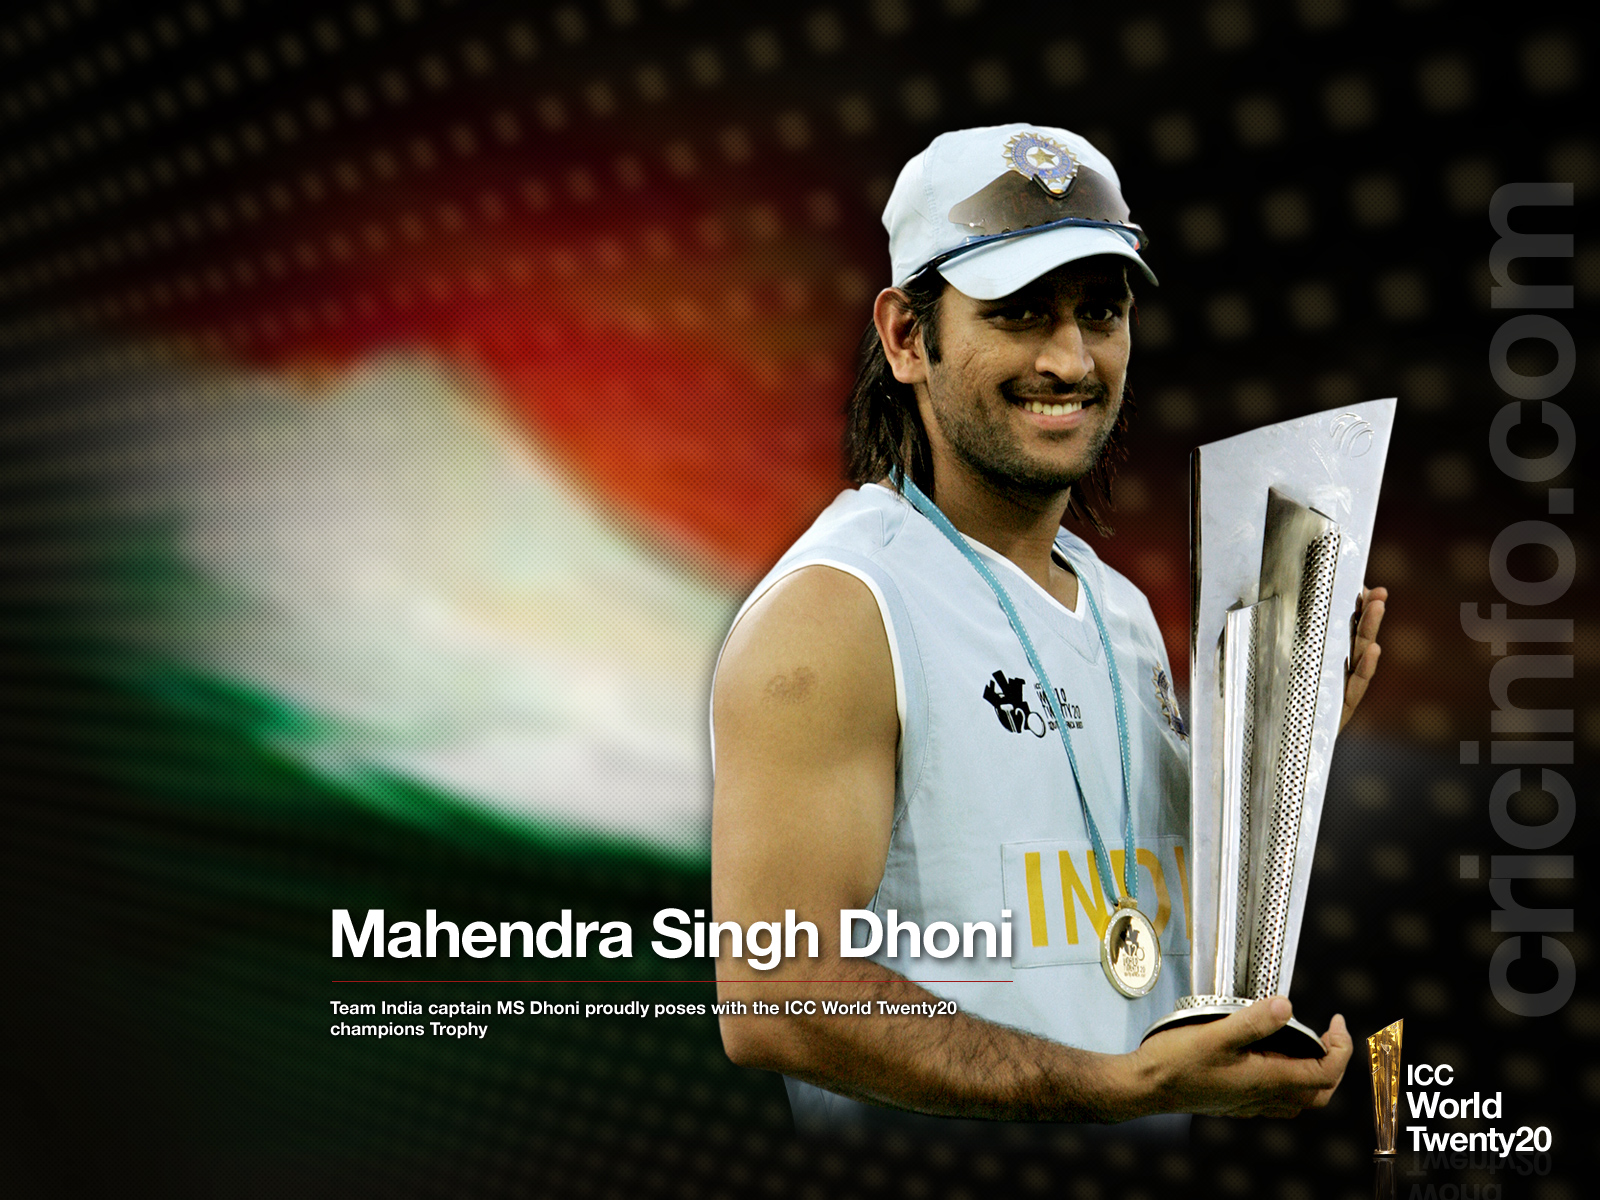 MS Dhoni poses with the T20 Trophy. Other wallpaper sizes: 800x600 